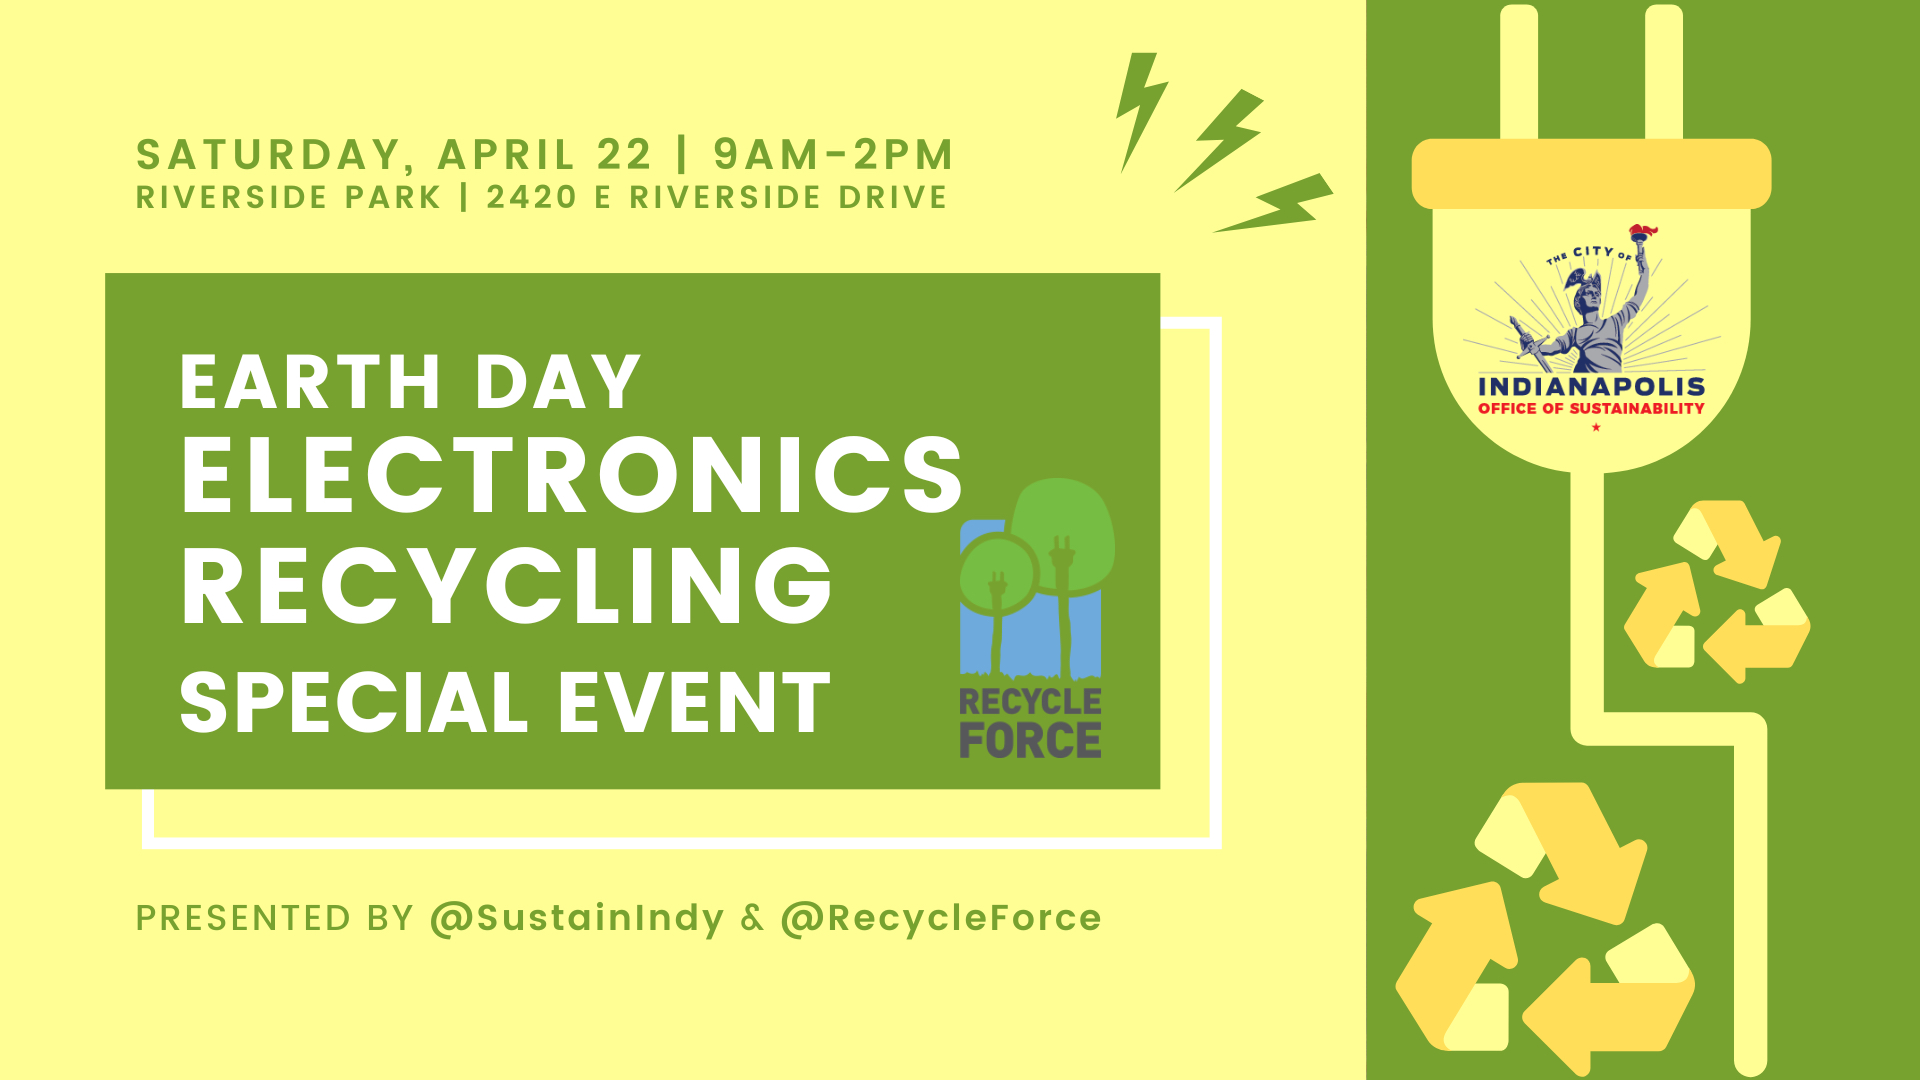 City Partners with RecycleForce for Earth Day Electronics Recycling